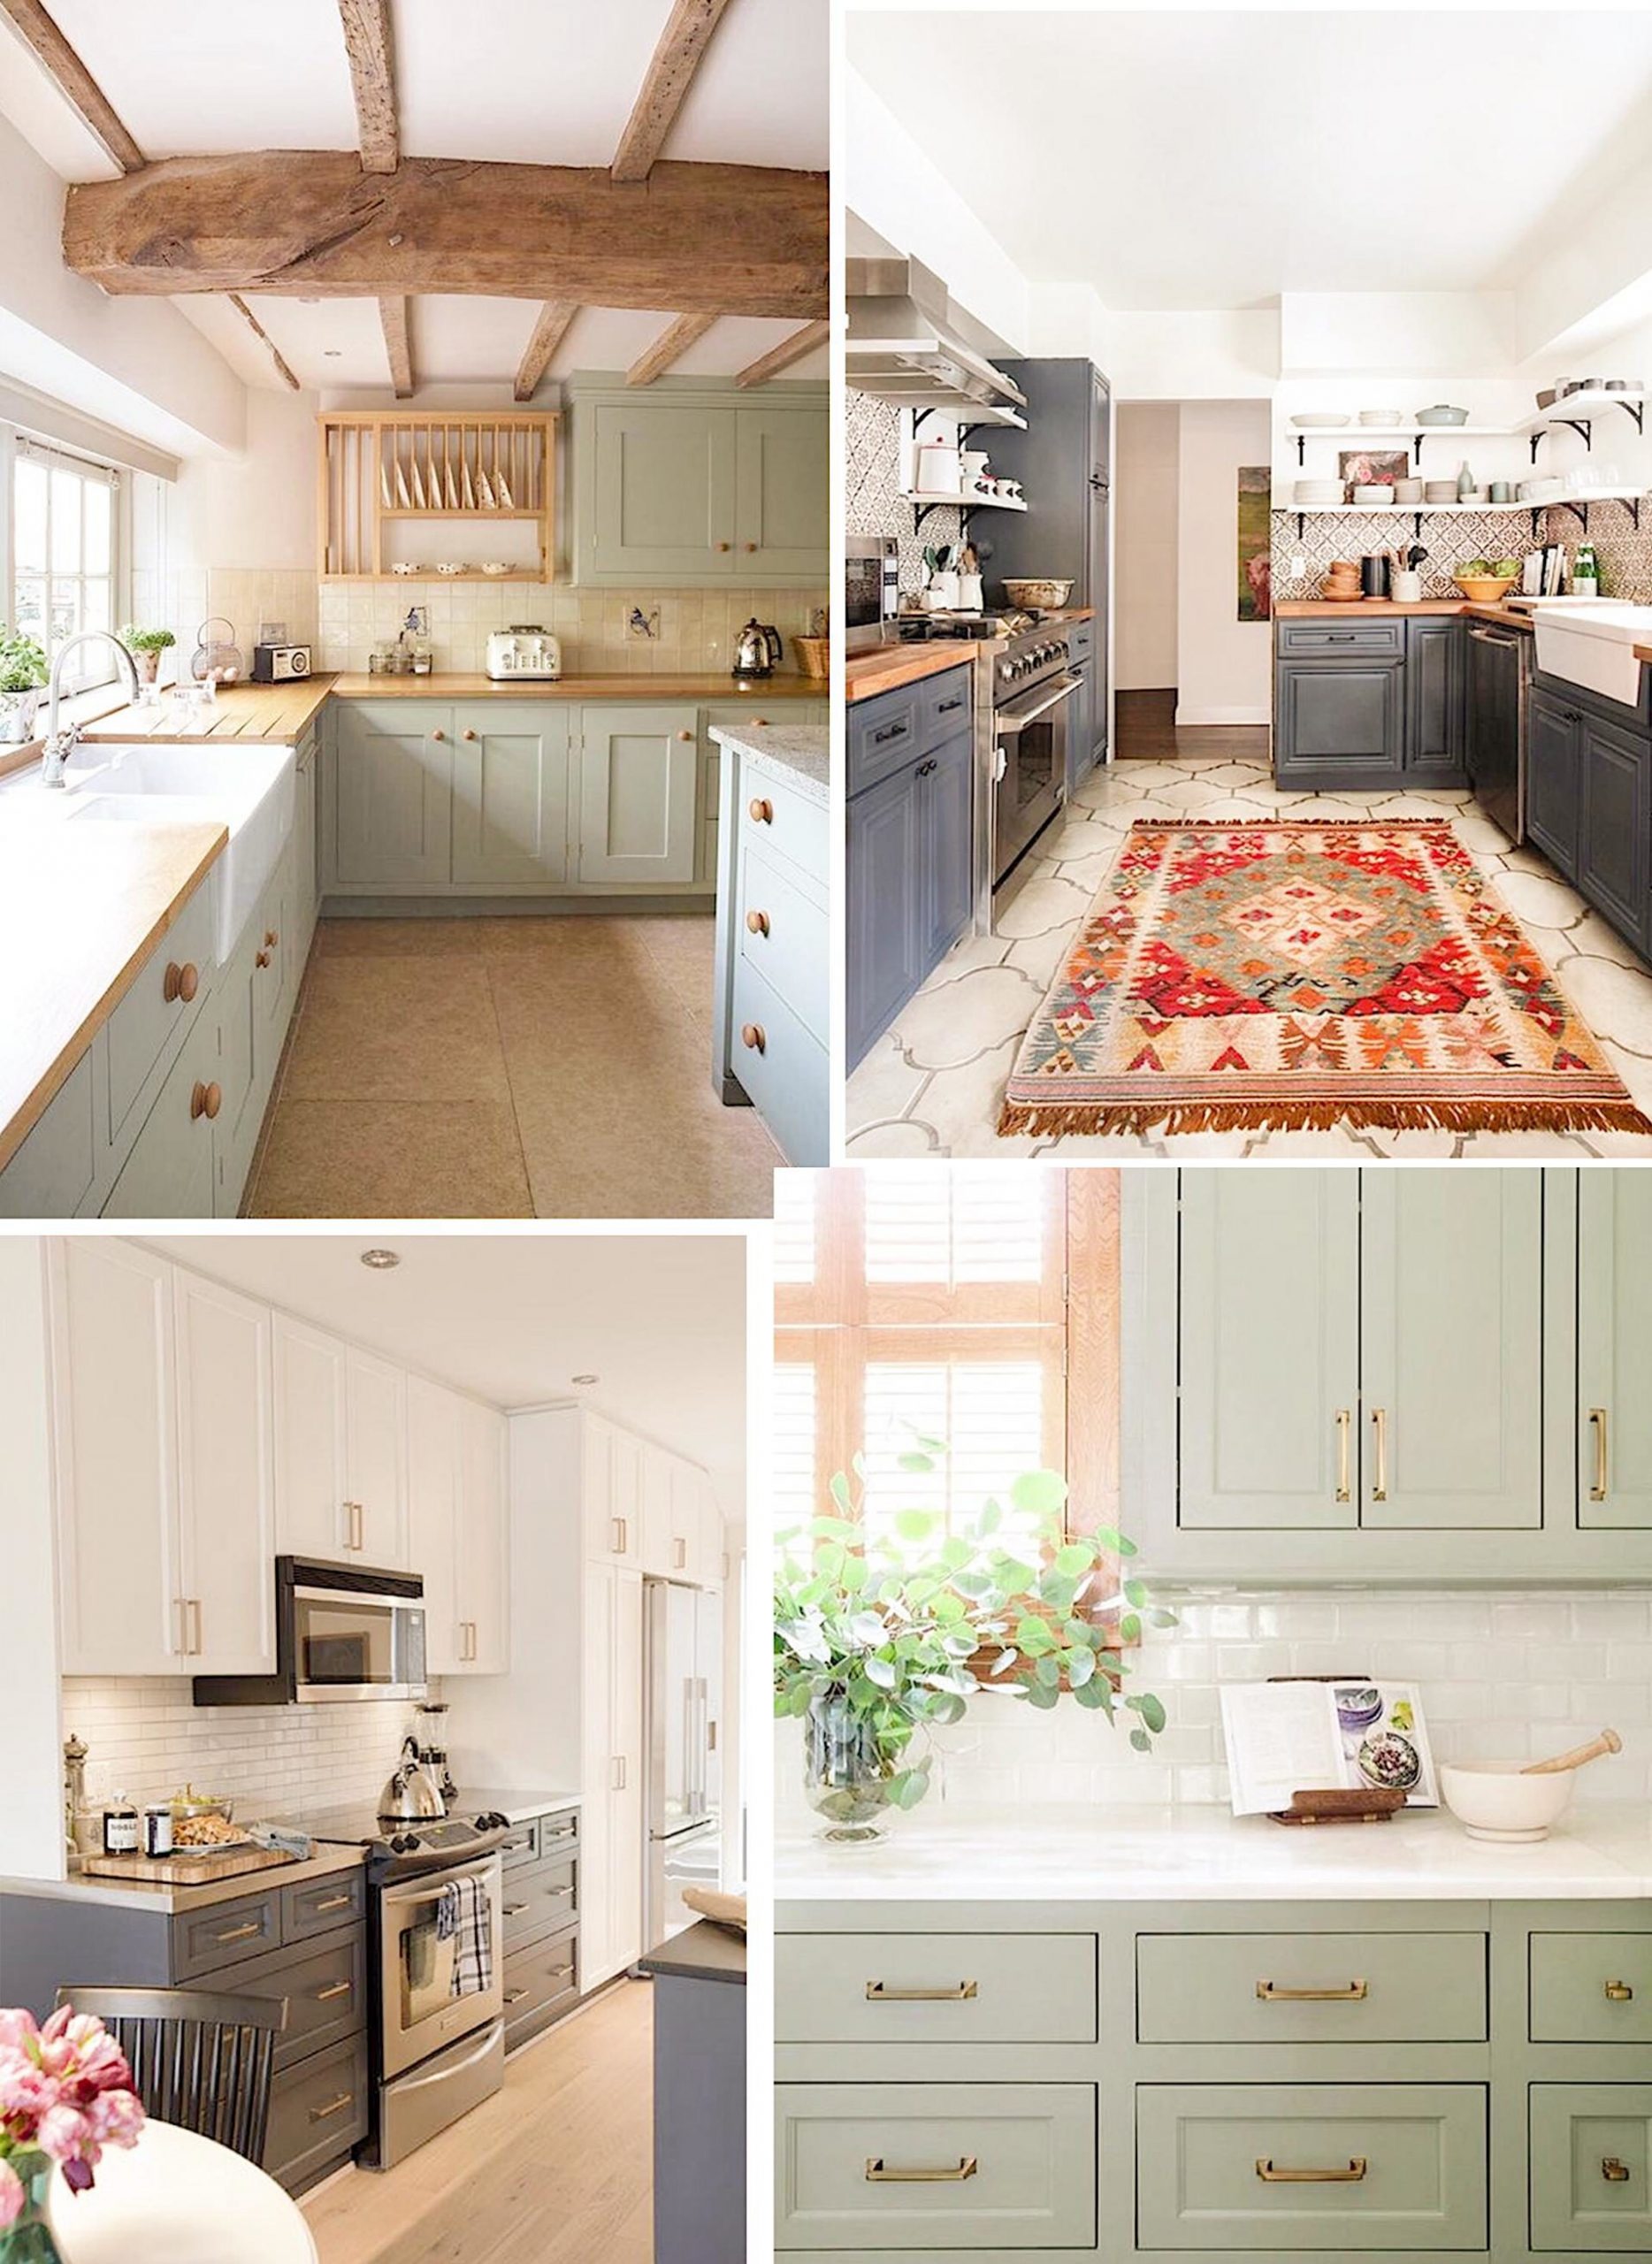 Our First House: Kitchen Inspiration